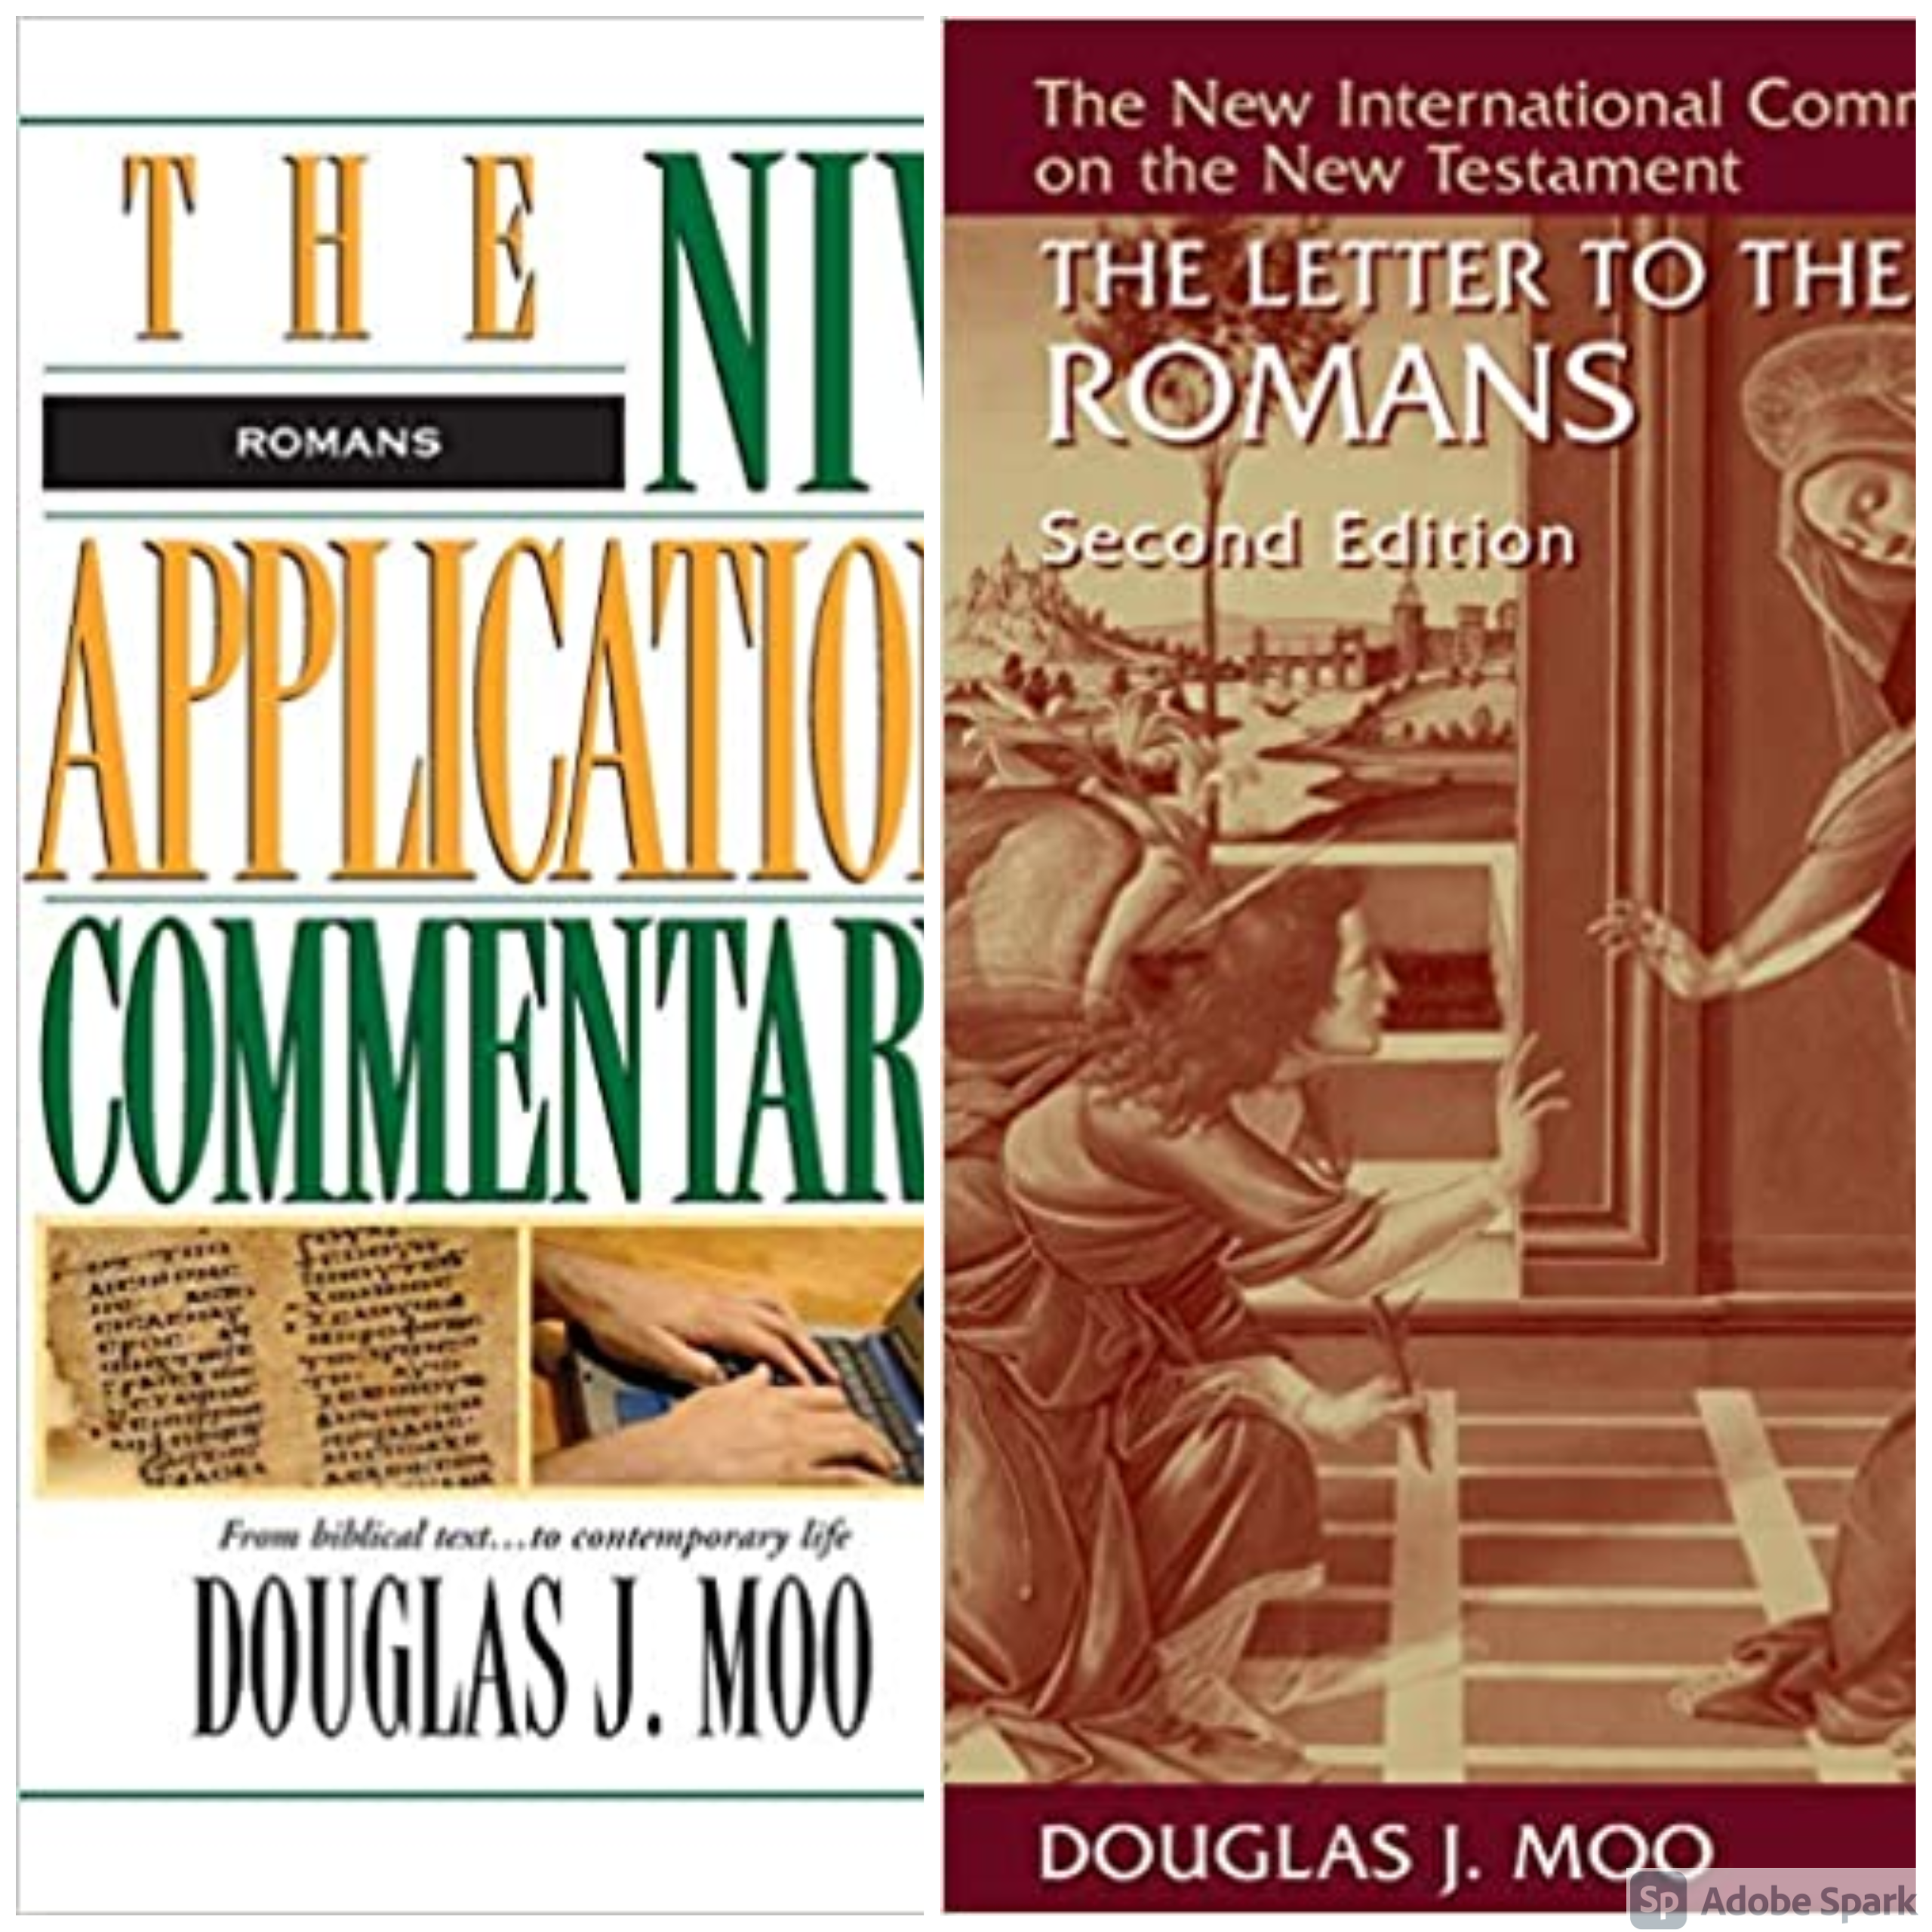 Book Notice: THE LETTER TO THE ROMANS (2ND EDITION), by Douglas J. Moo